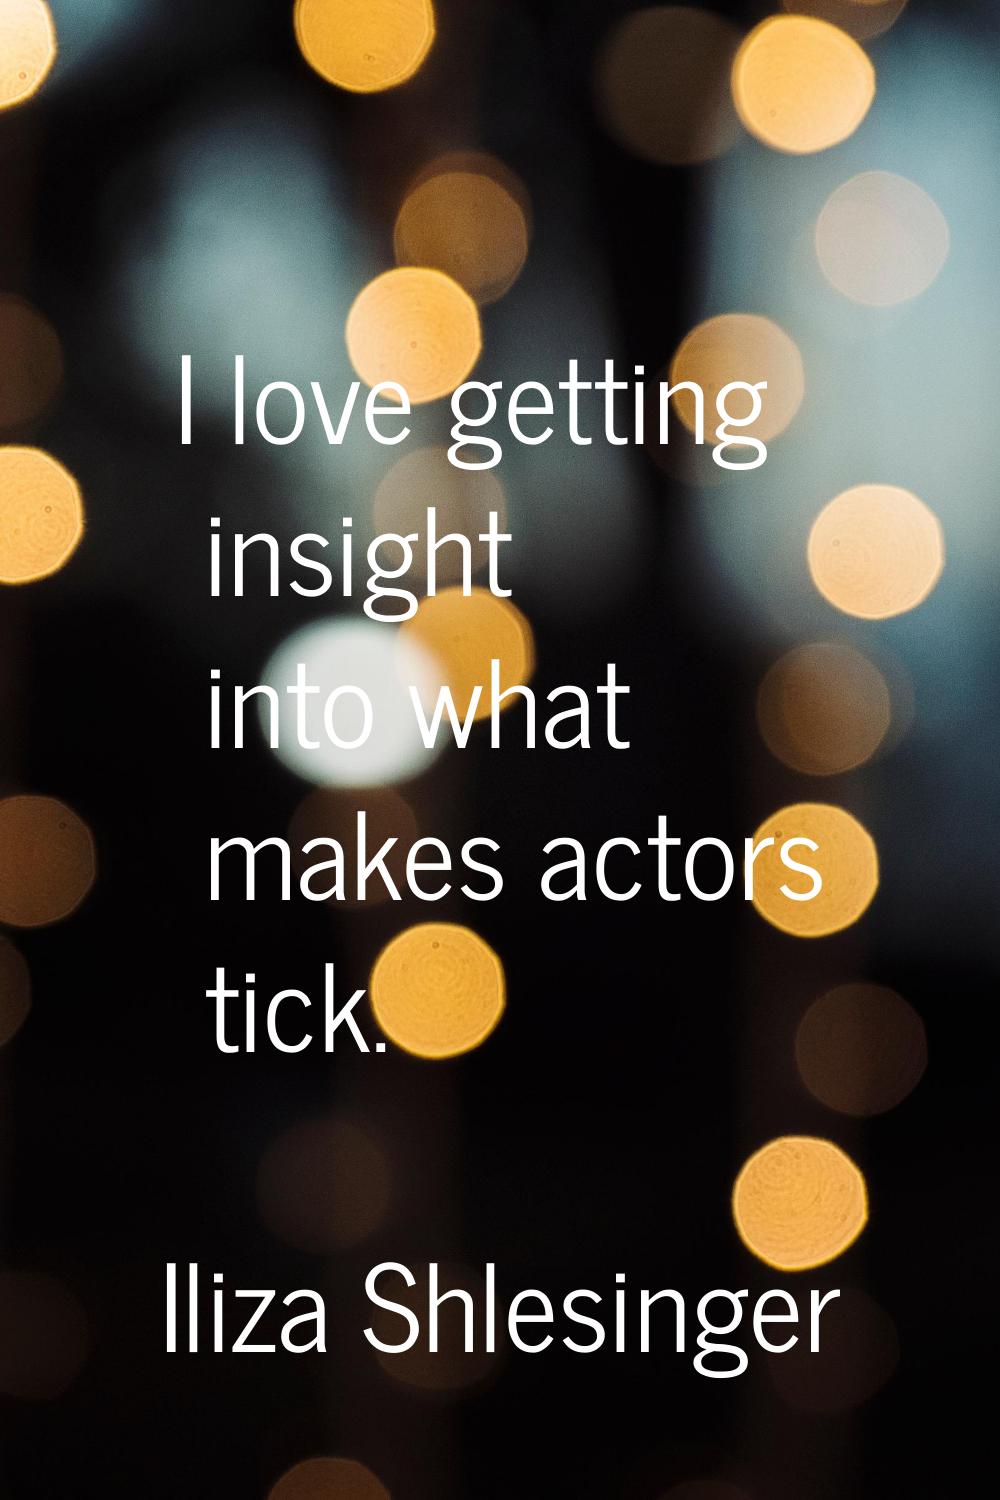 I love getting insight into what makes actors tick.